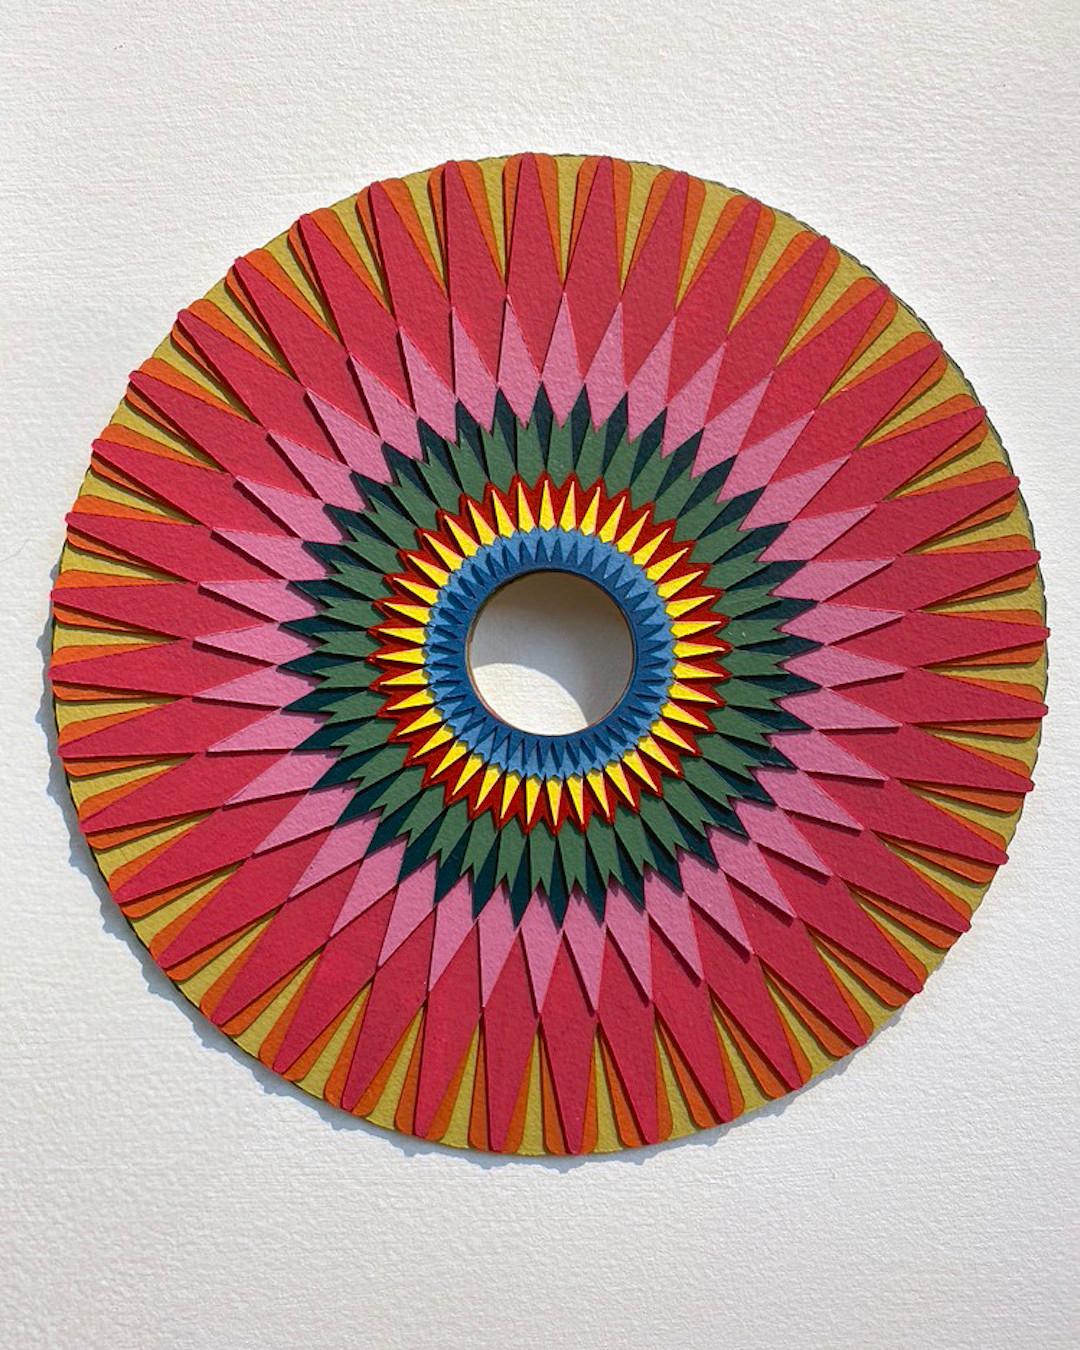 It's Complicated, Gouache on paper, wall sculpture by Christine Romanell